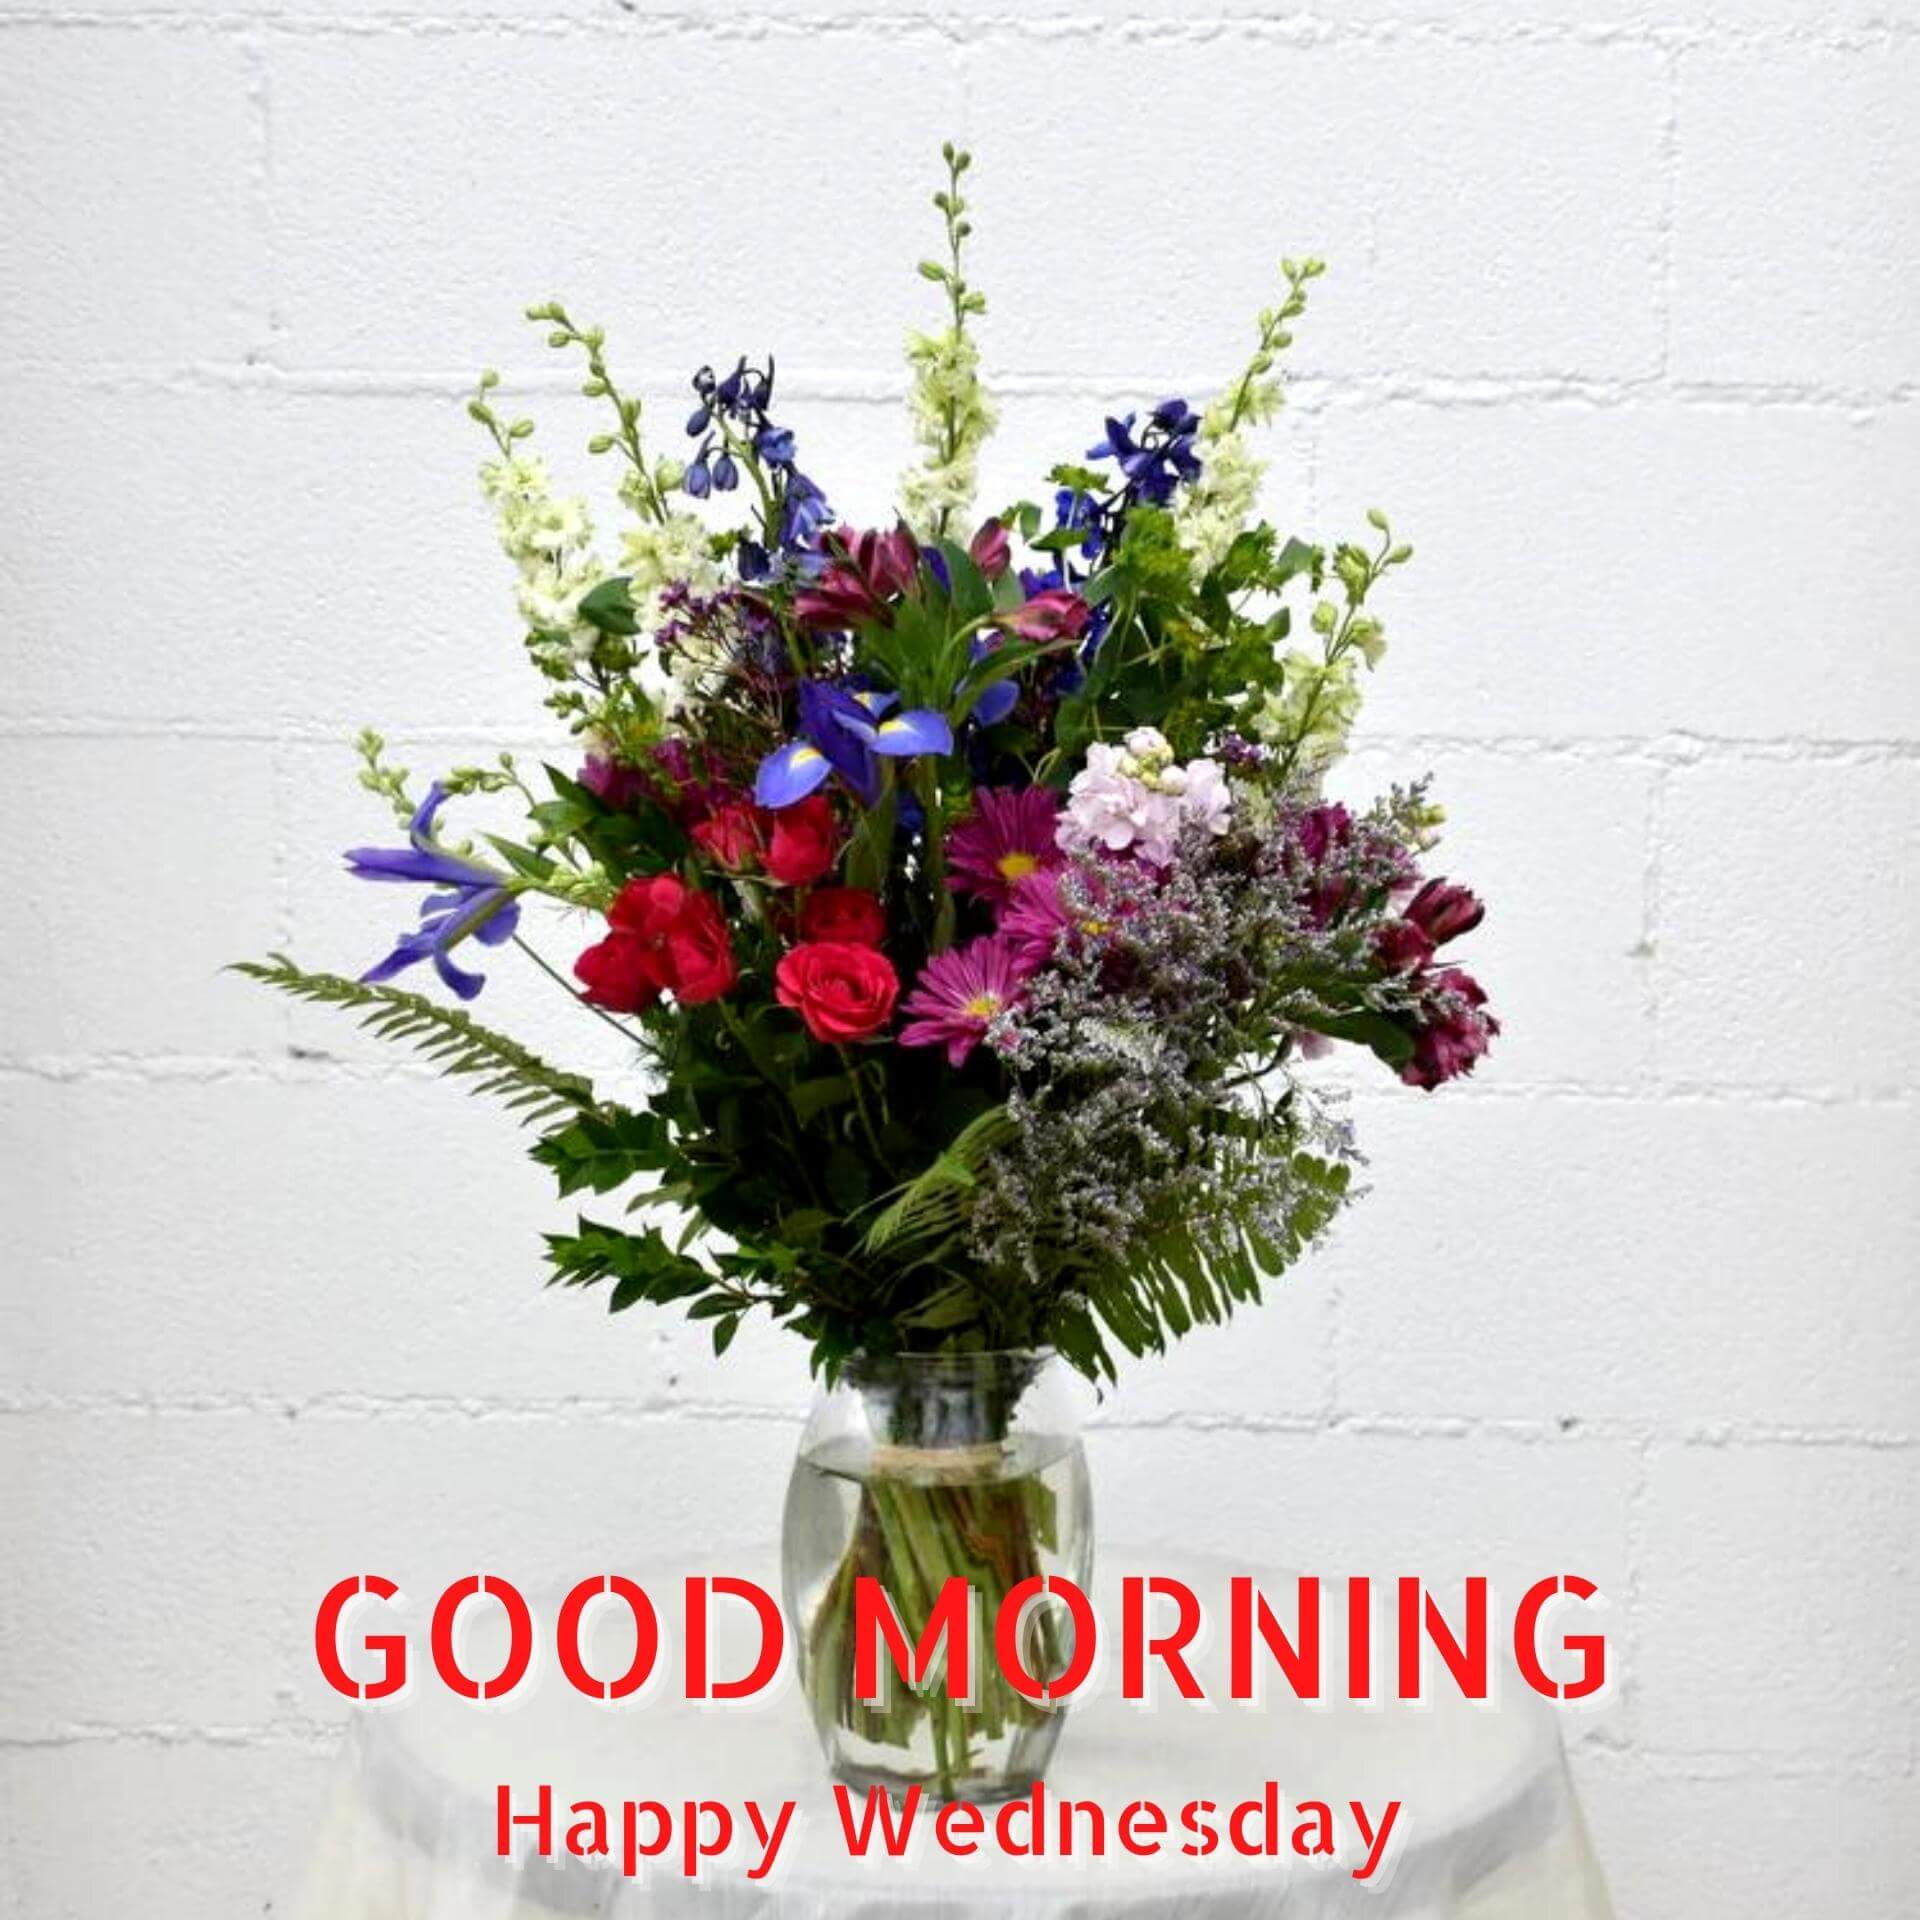 Wednesday good morning Wallpaper Photo Download